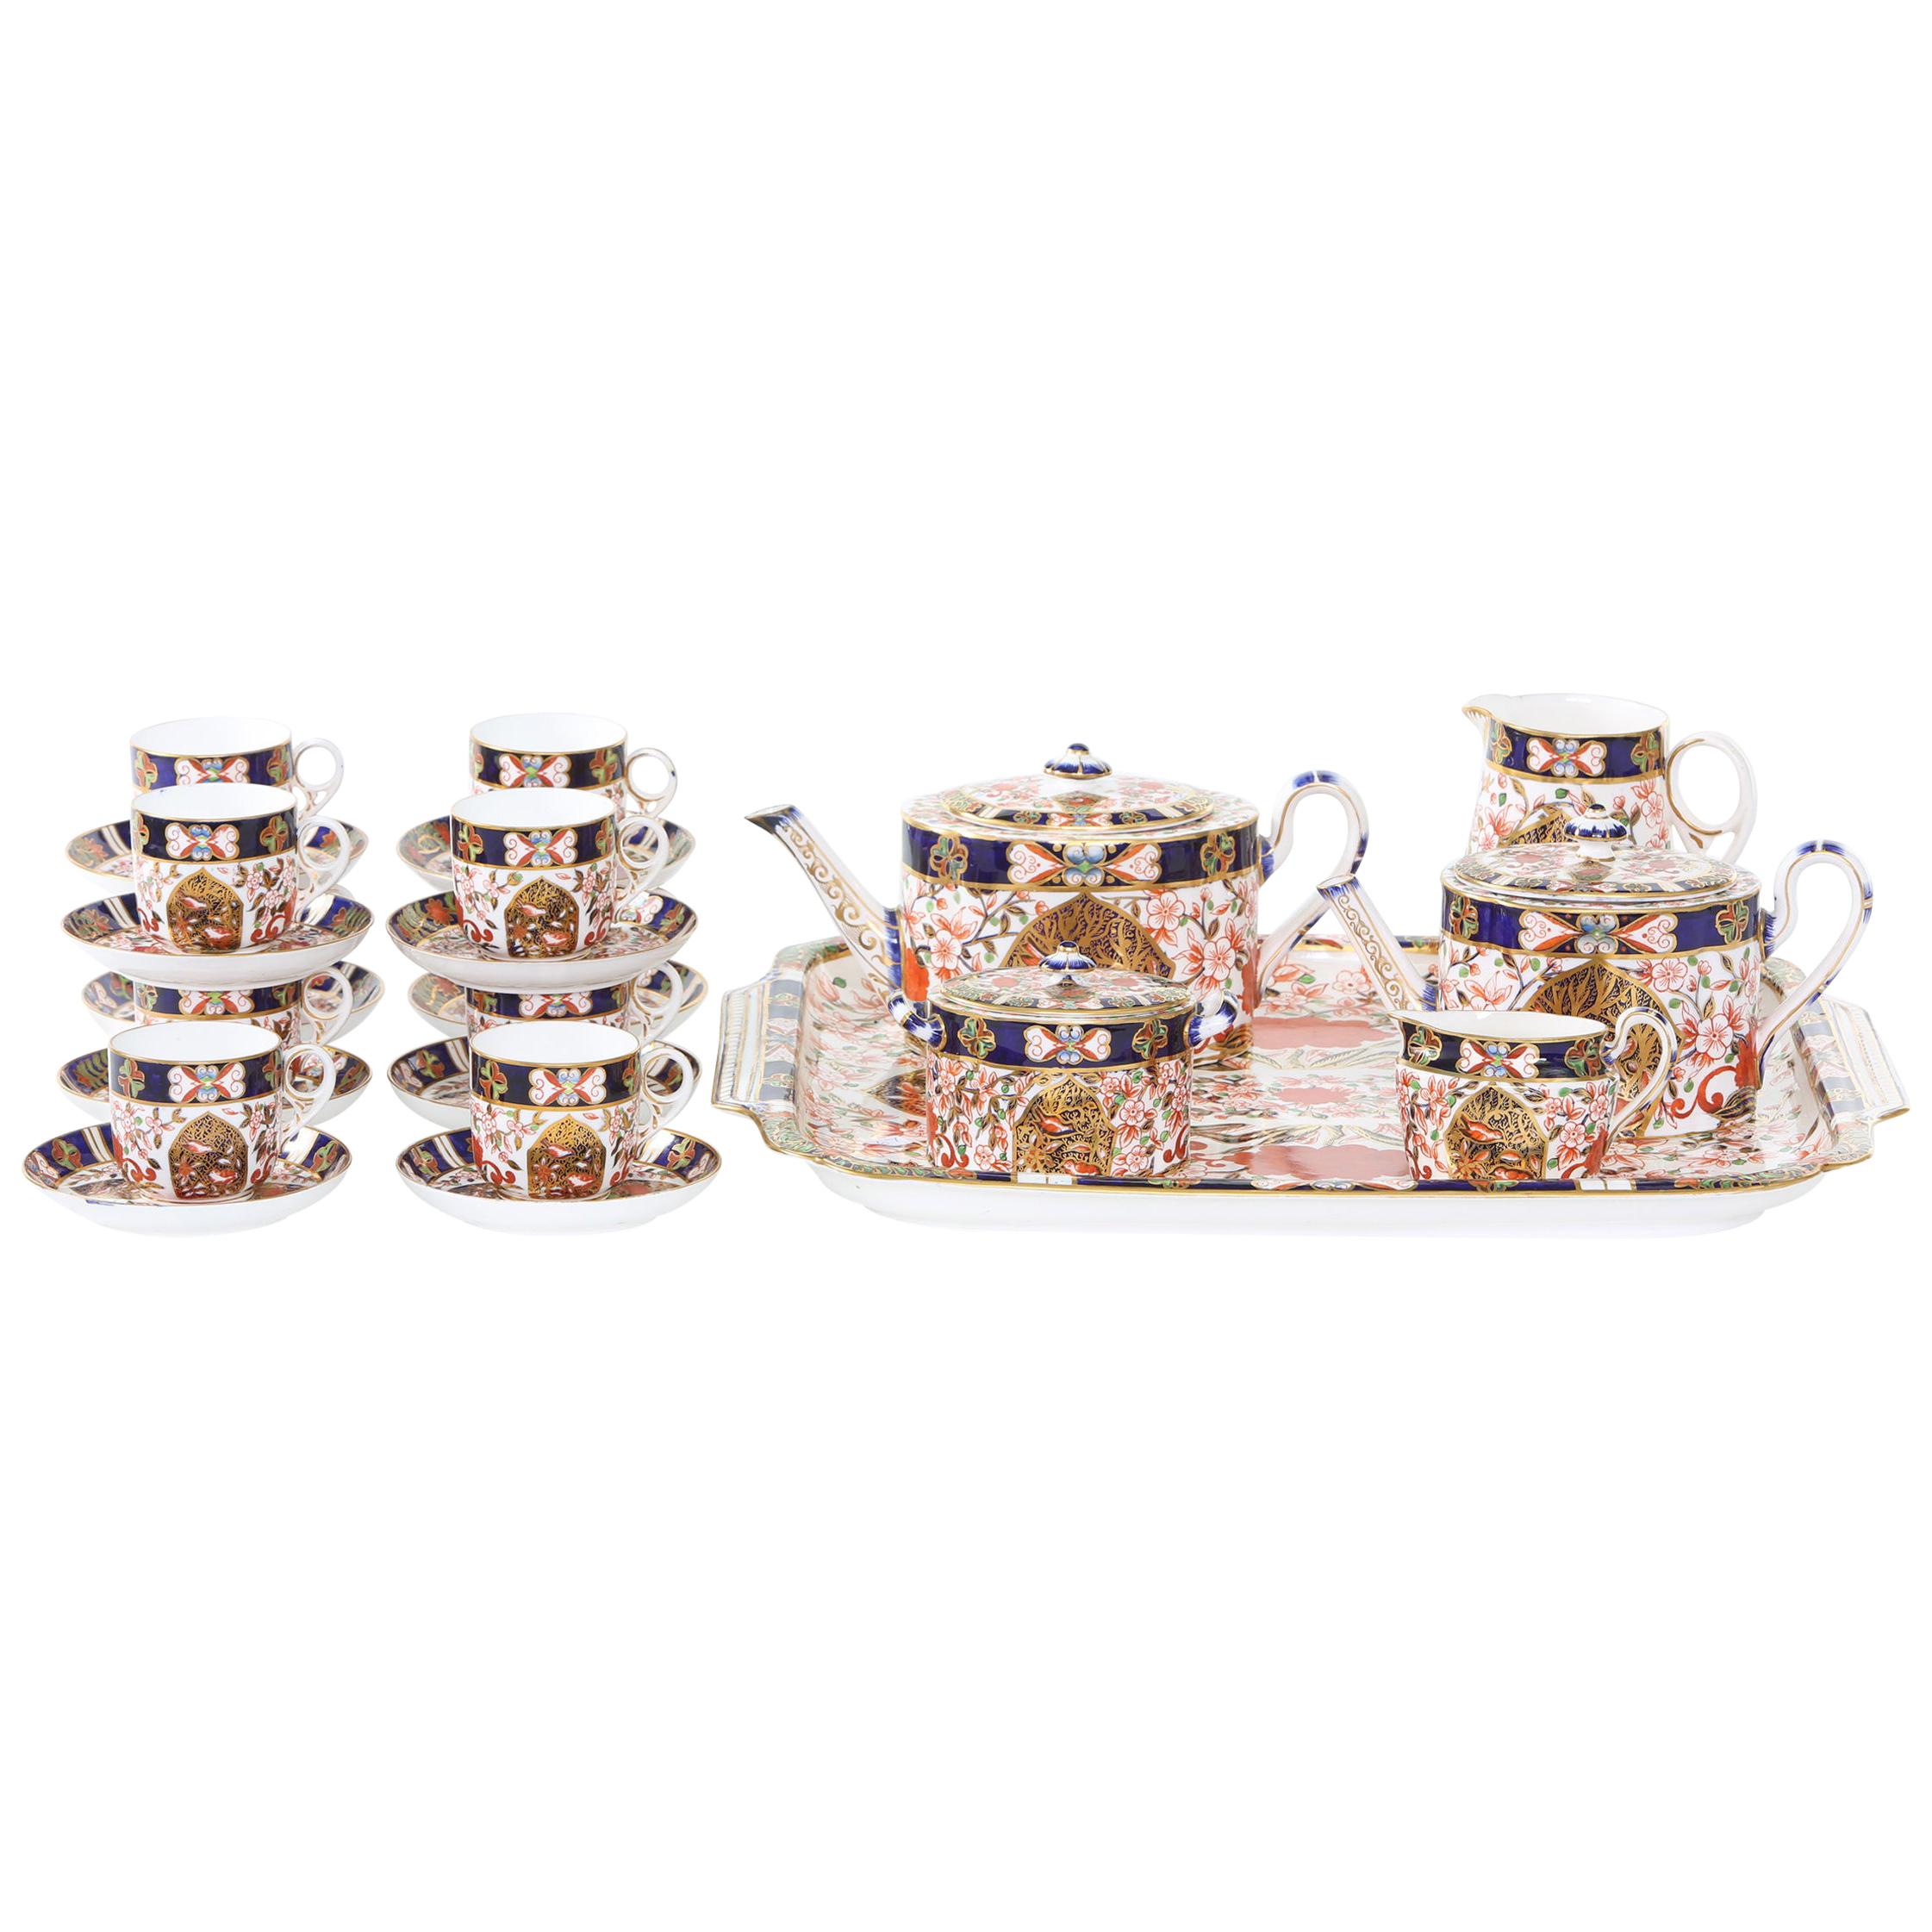 19th Century English Crown Derby Service for Ten People